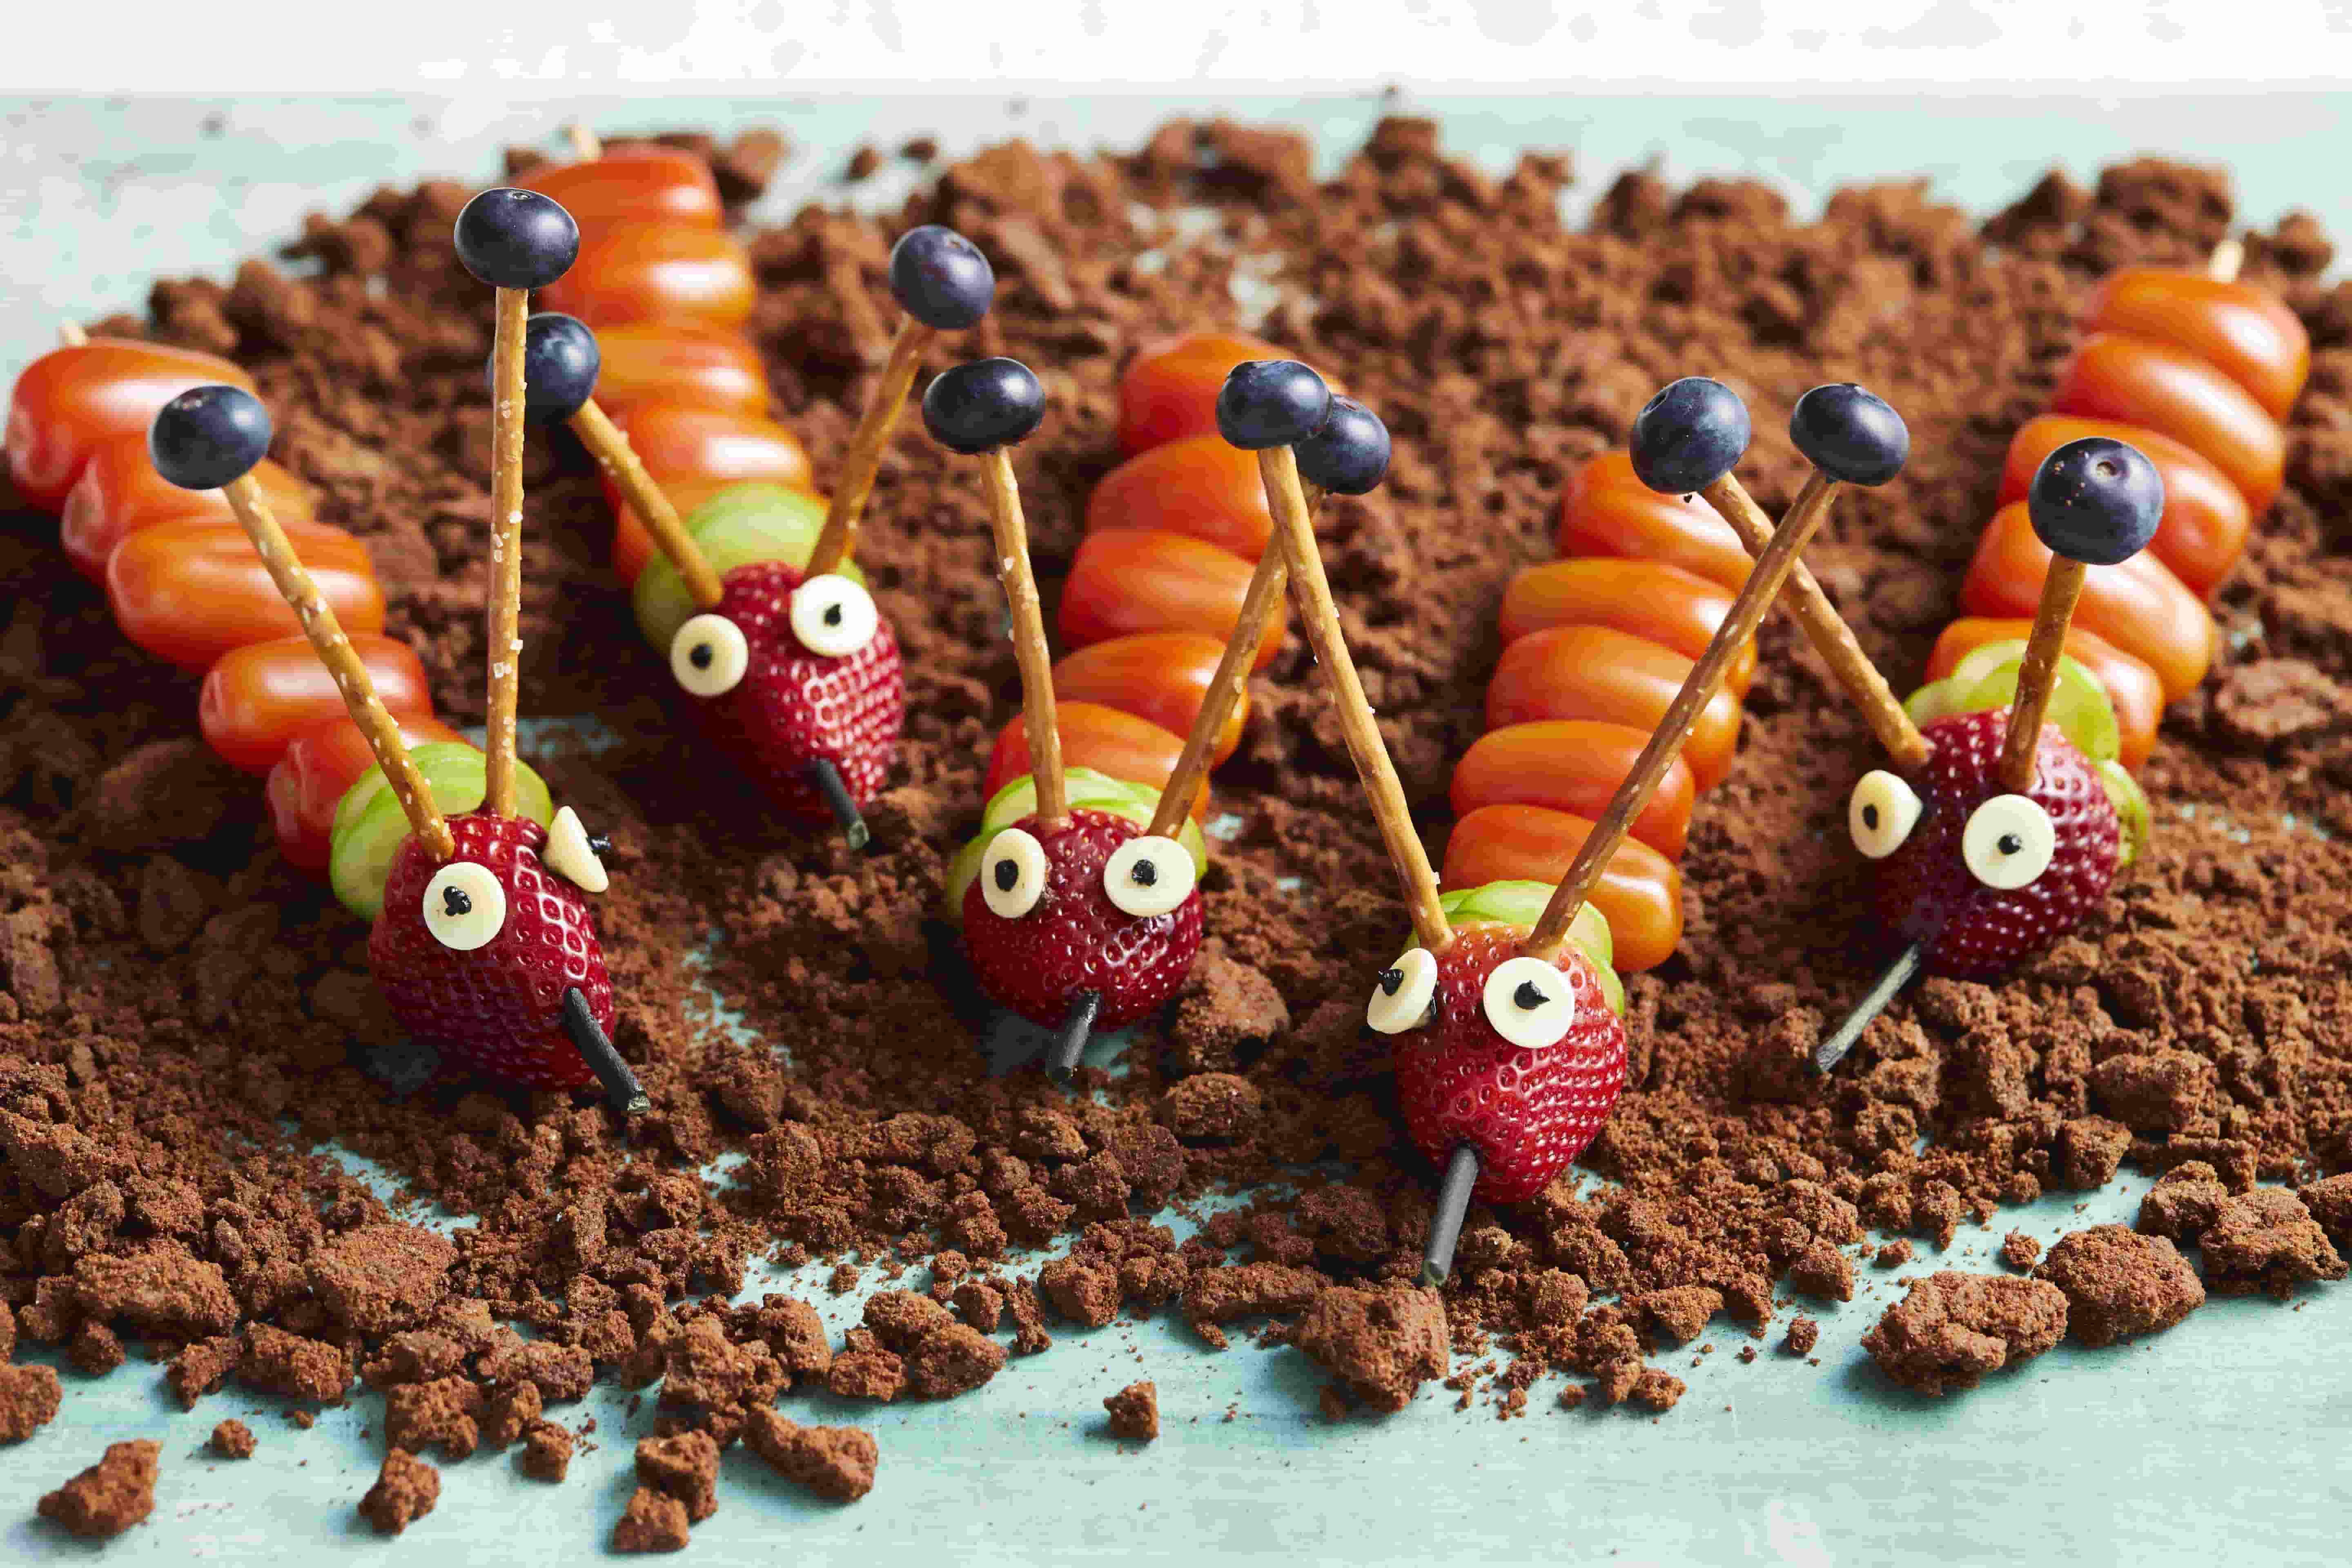 Edible caterpillars made out of strawberries, blueberries, tomatoes, and cucumbers.